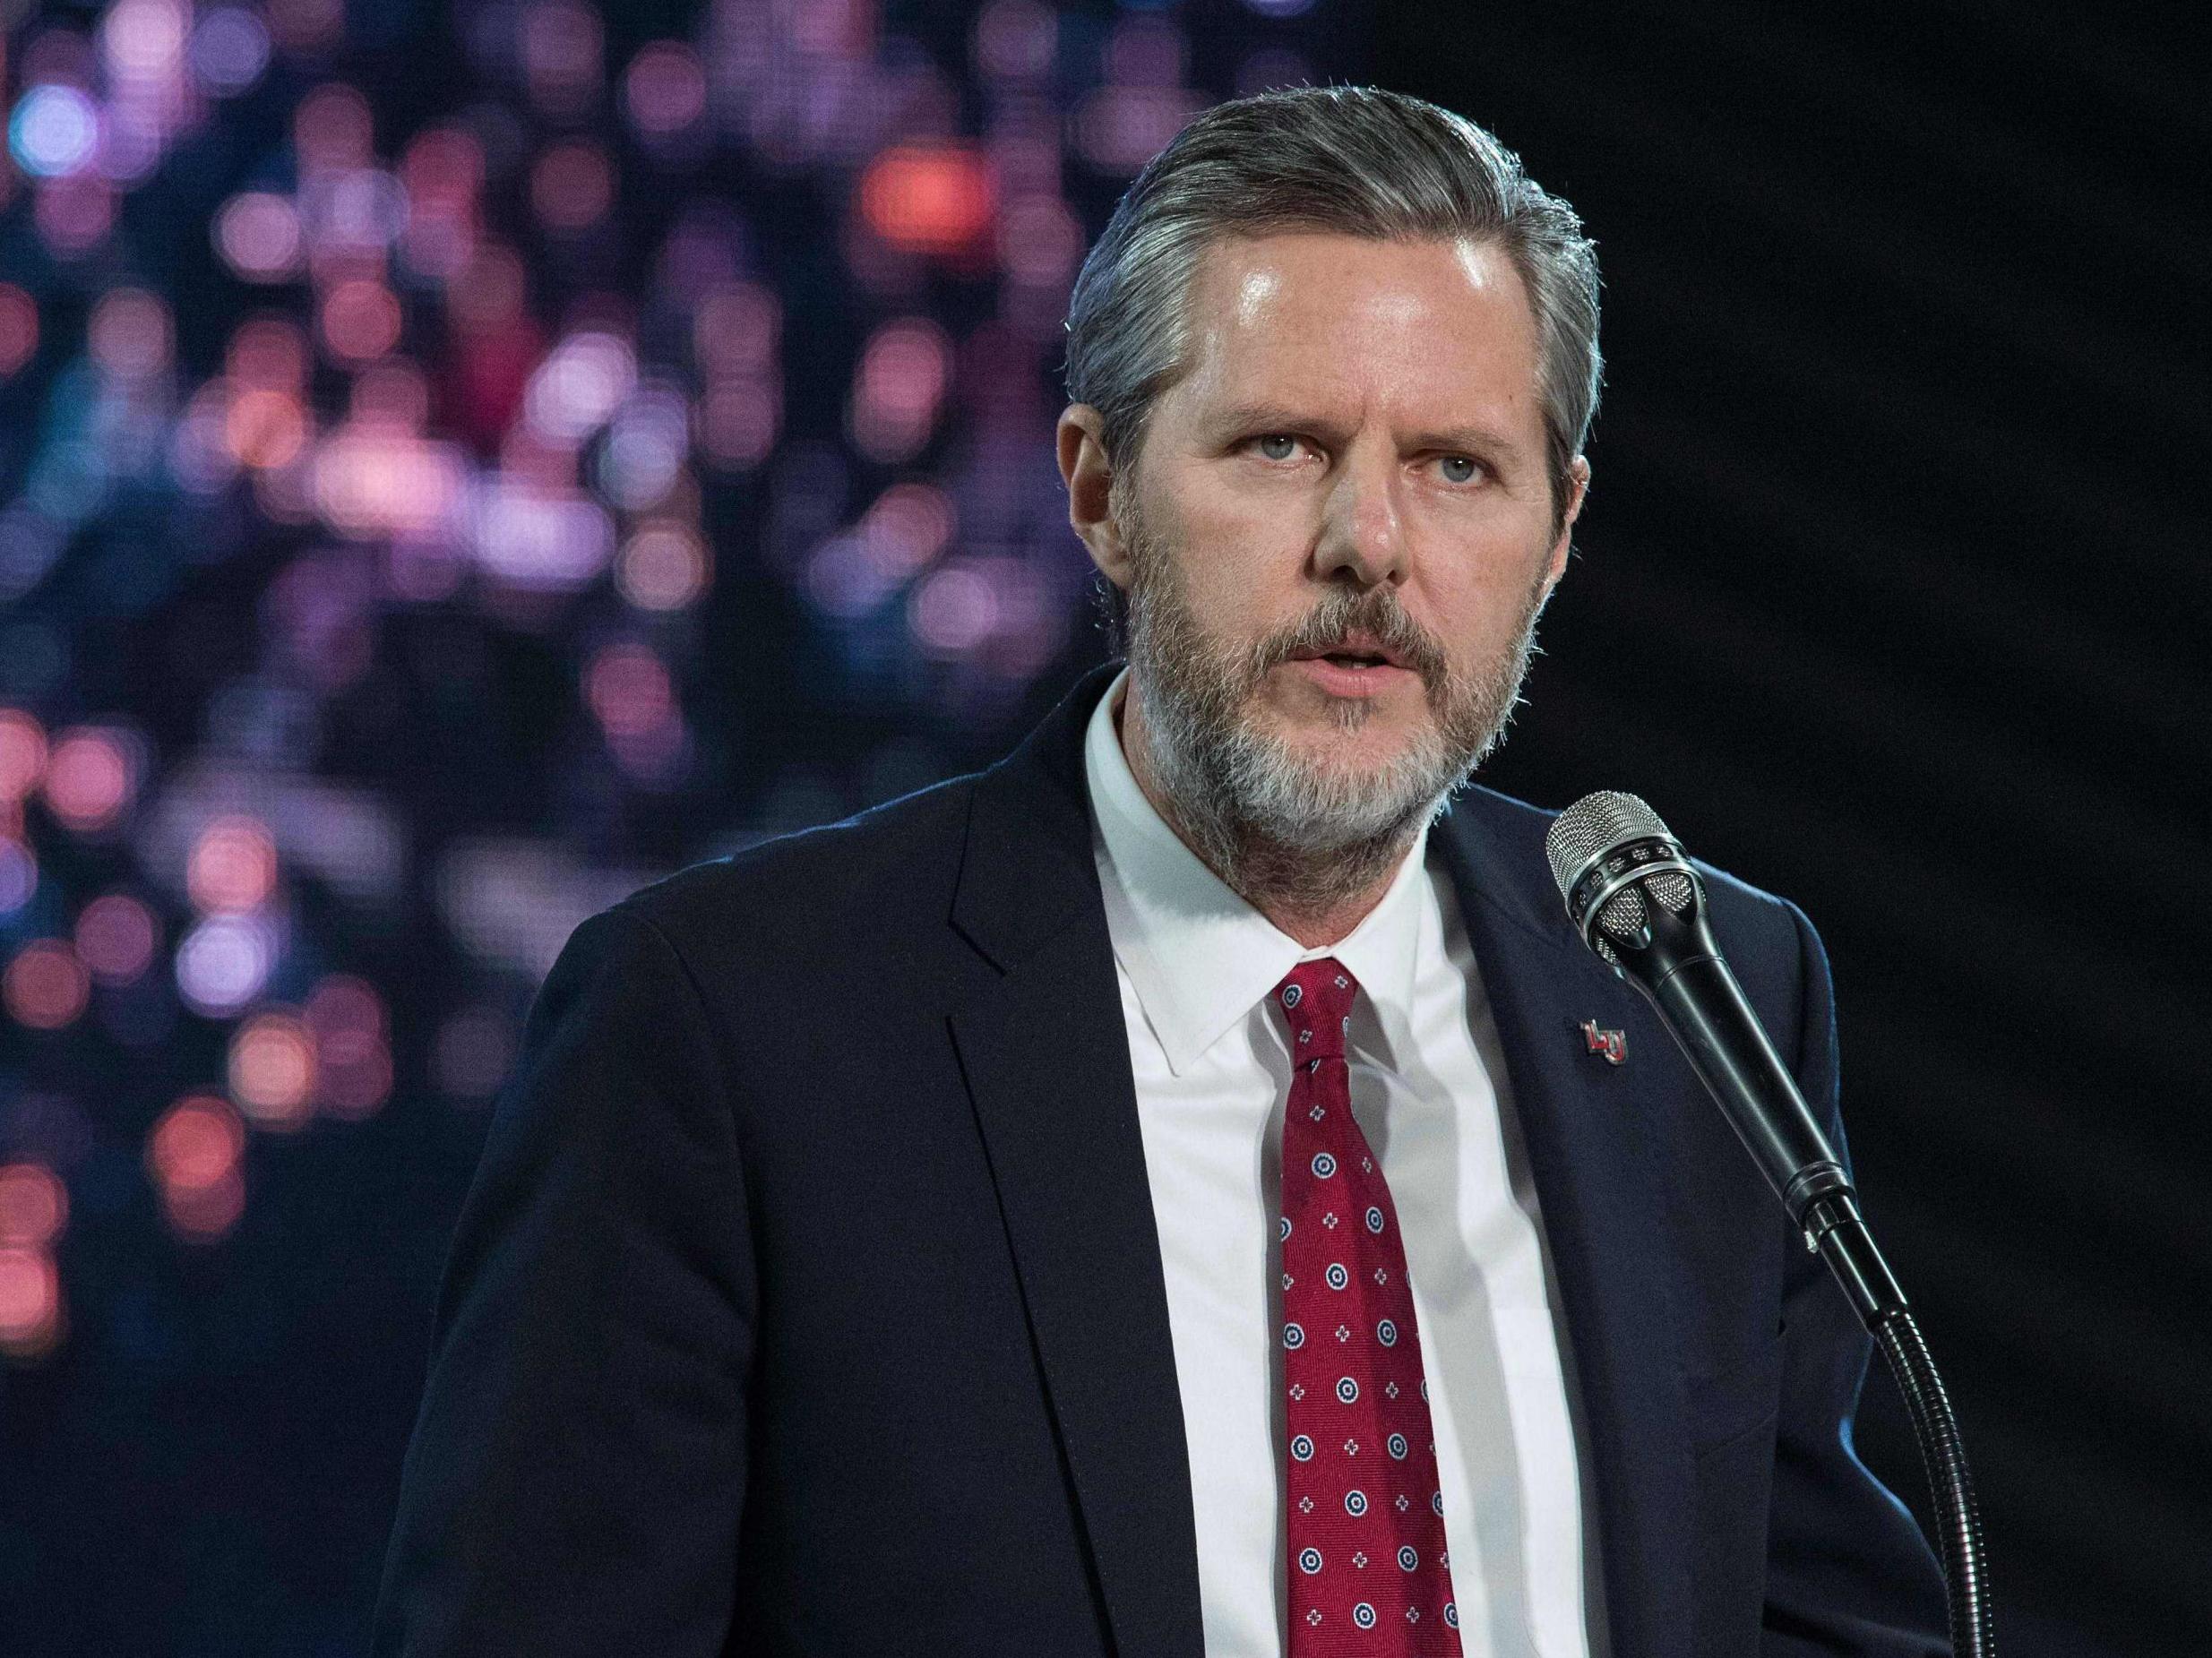 Revelations come not long after Jerry Falwell Jr agreed to take an indefinite leave of absence from his position at Liberty University